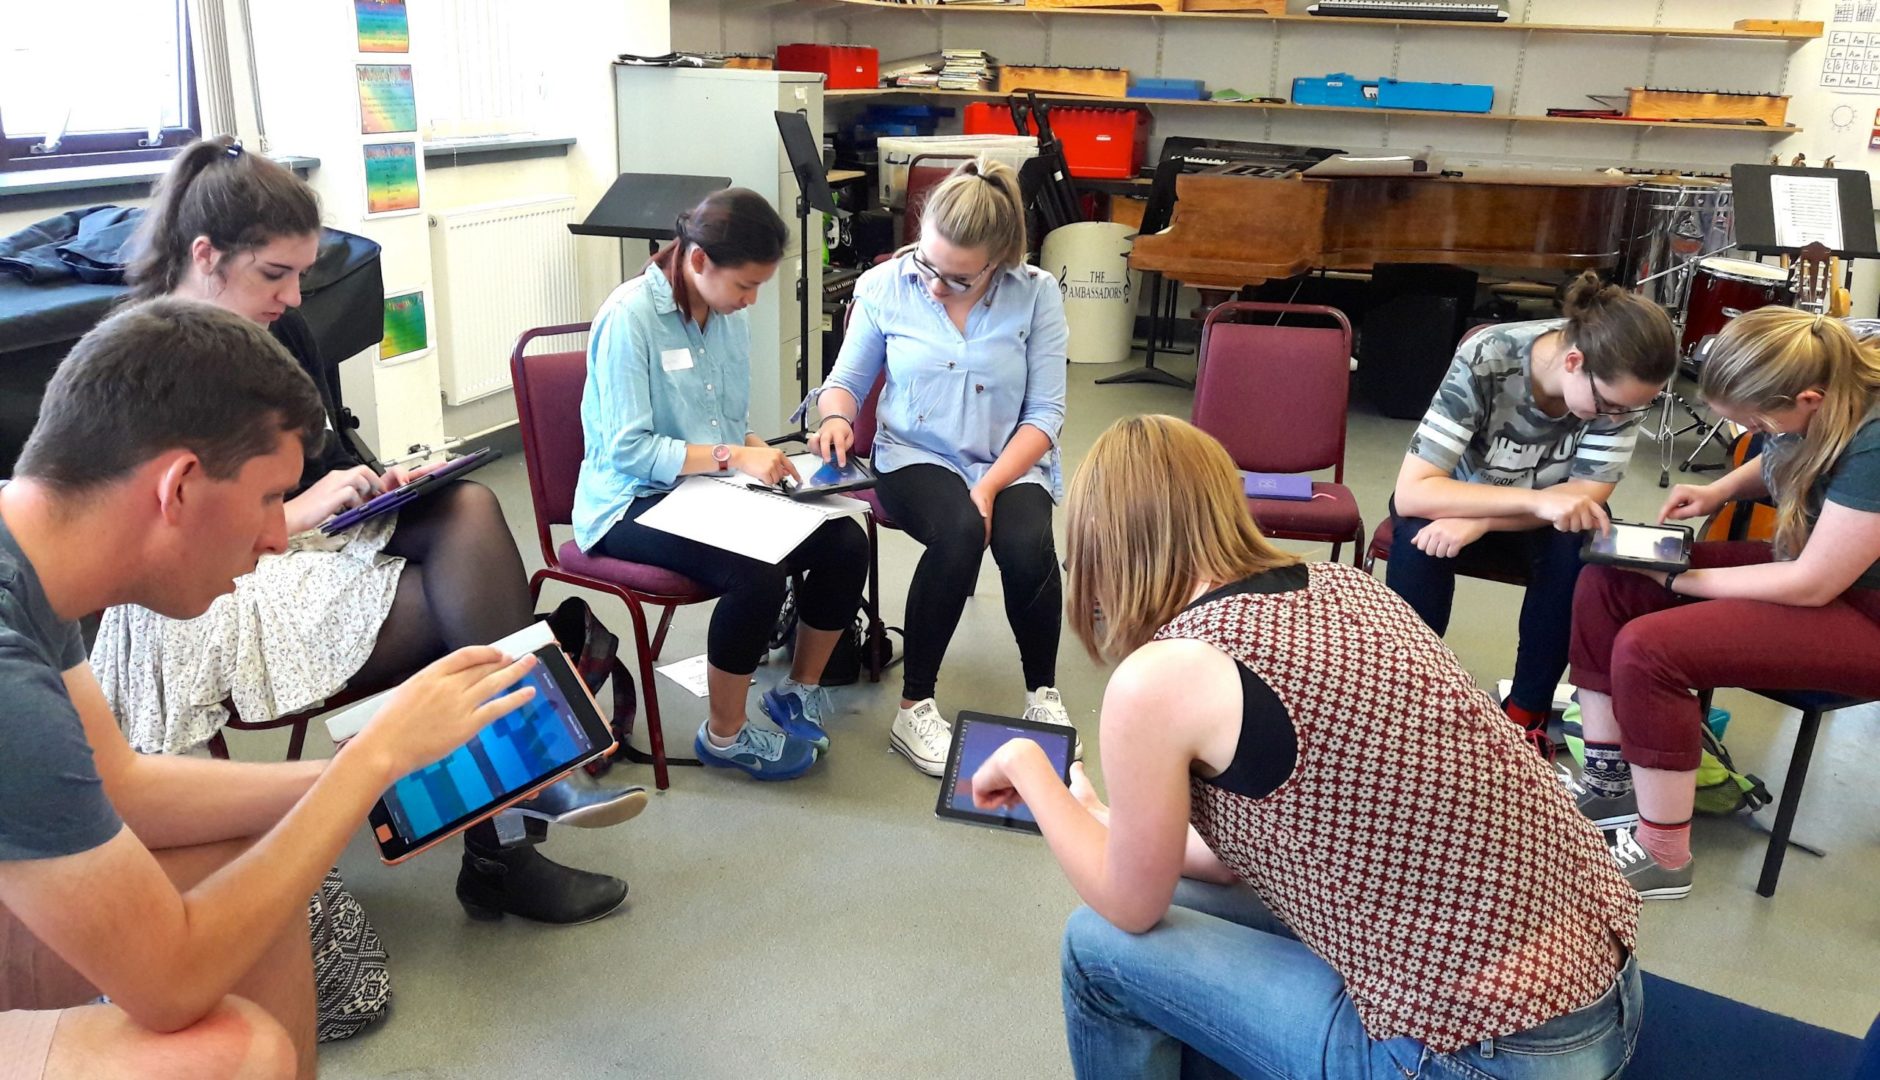 A group of students sit in a circle working on the Thumbjam apps on their iPads at a training day.